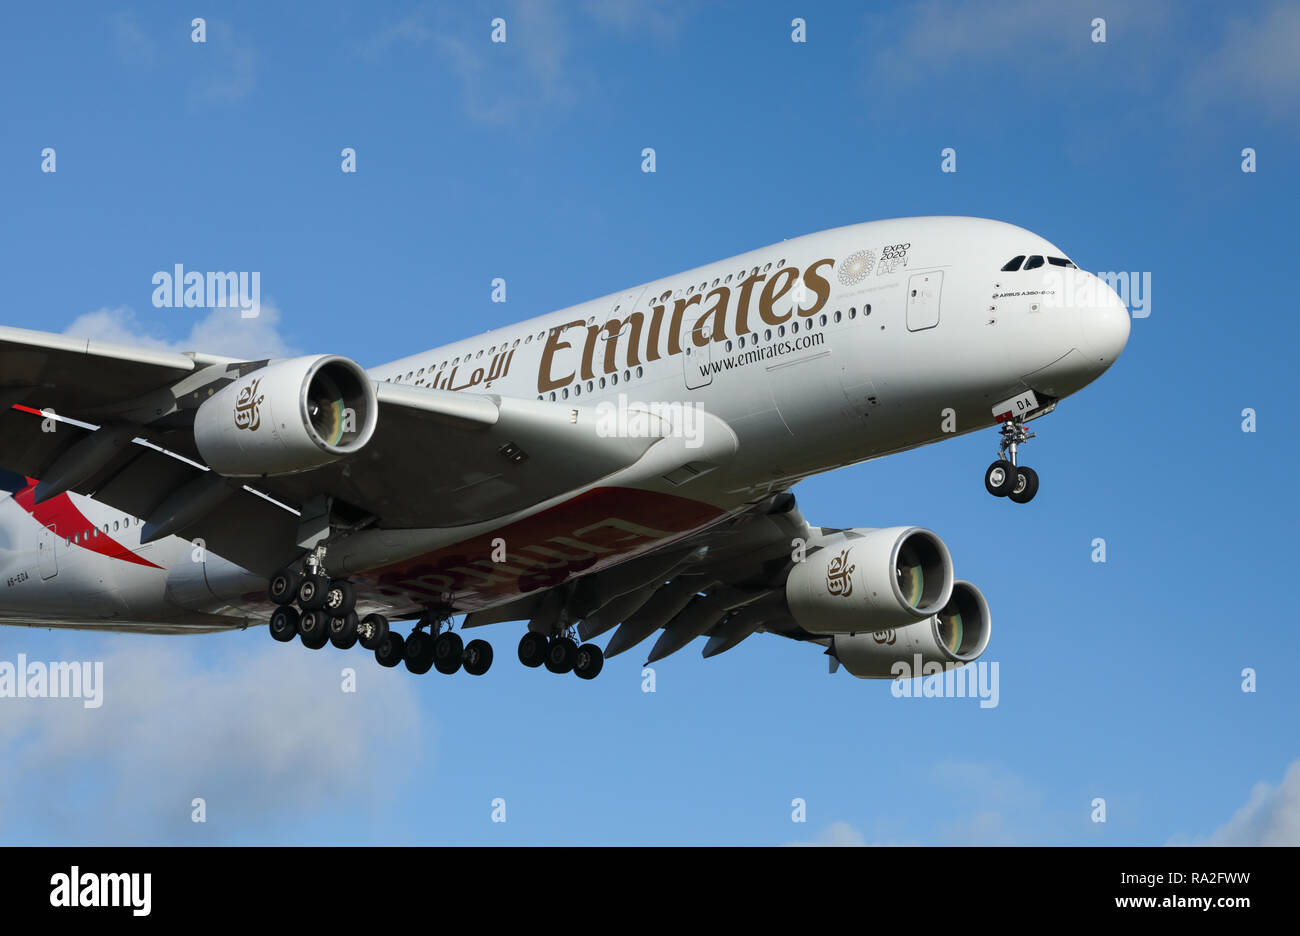 An Emirates Airbus A380 passenger airliner, serial no. A6-EDA, approaching the runway at Birmingham International airport, West Midlands, UK. Stock Photo